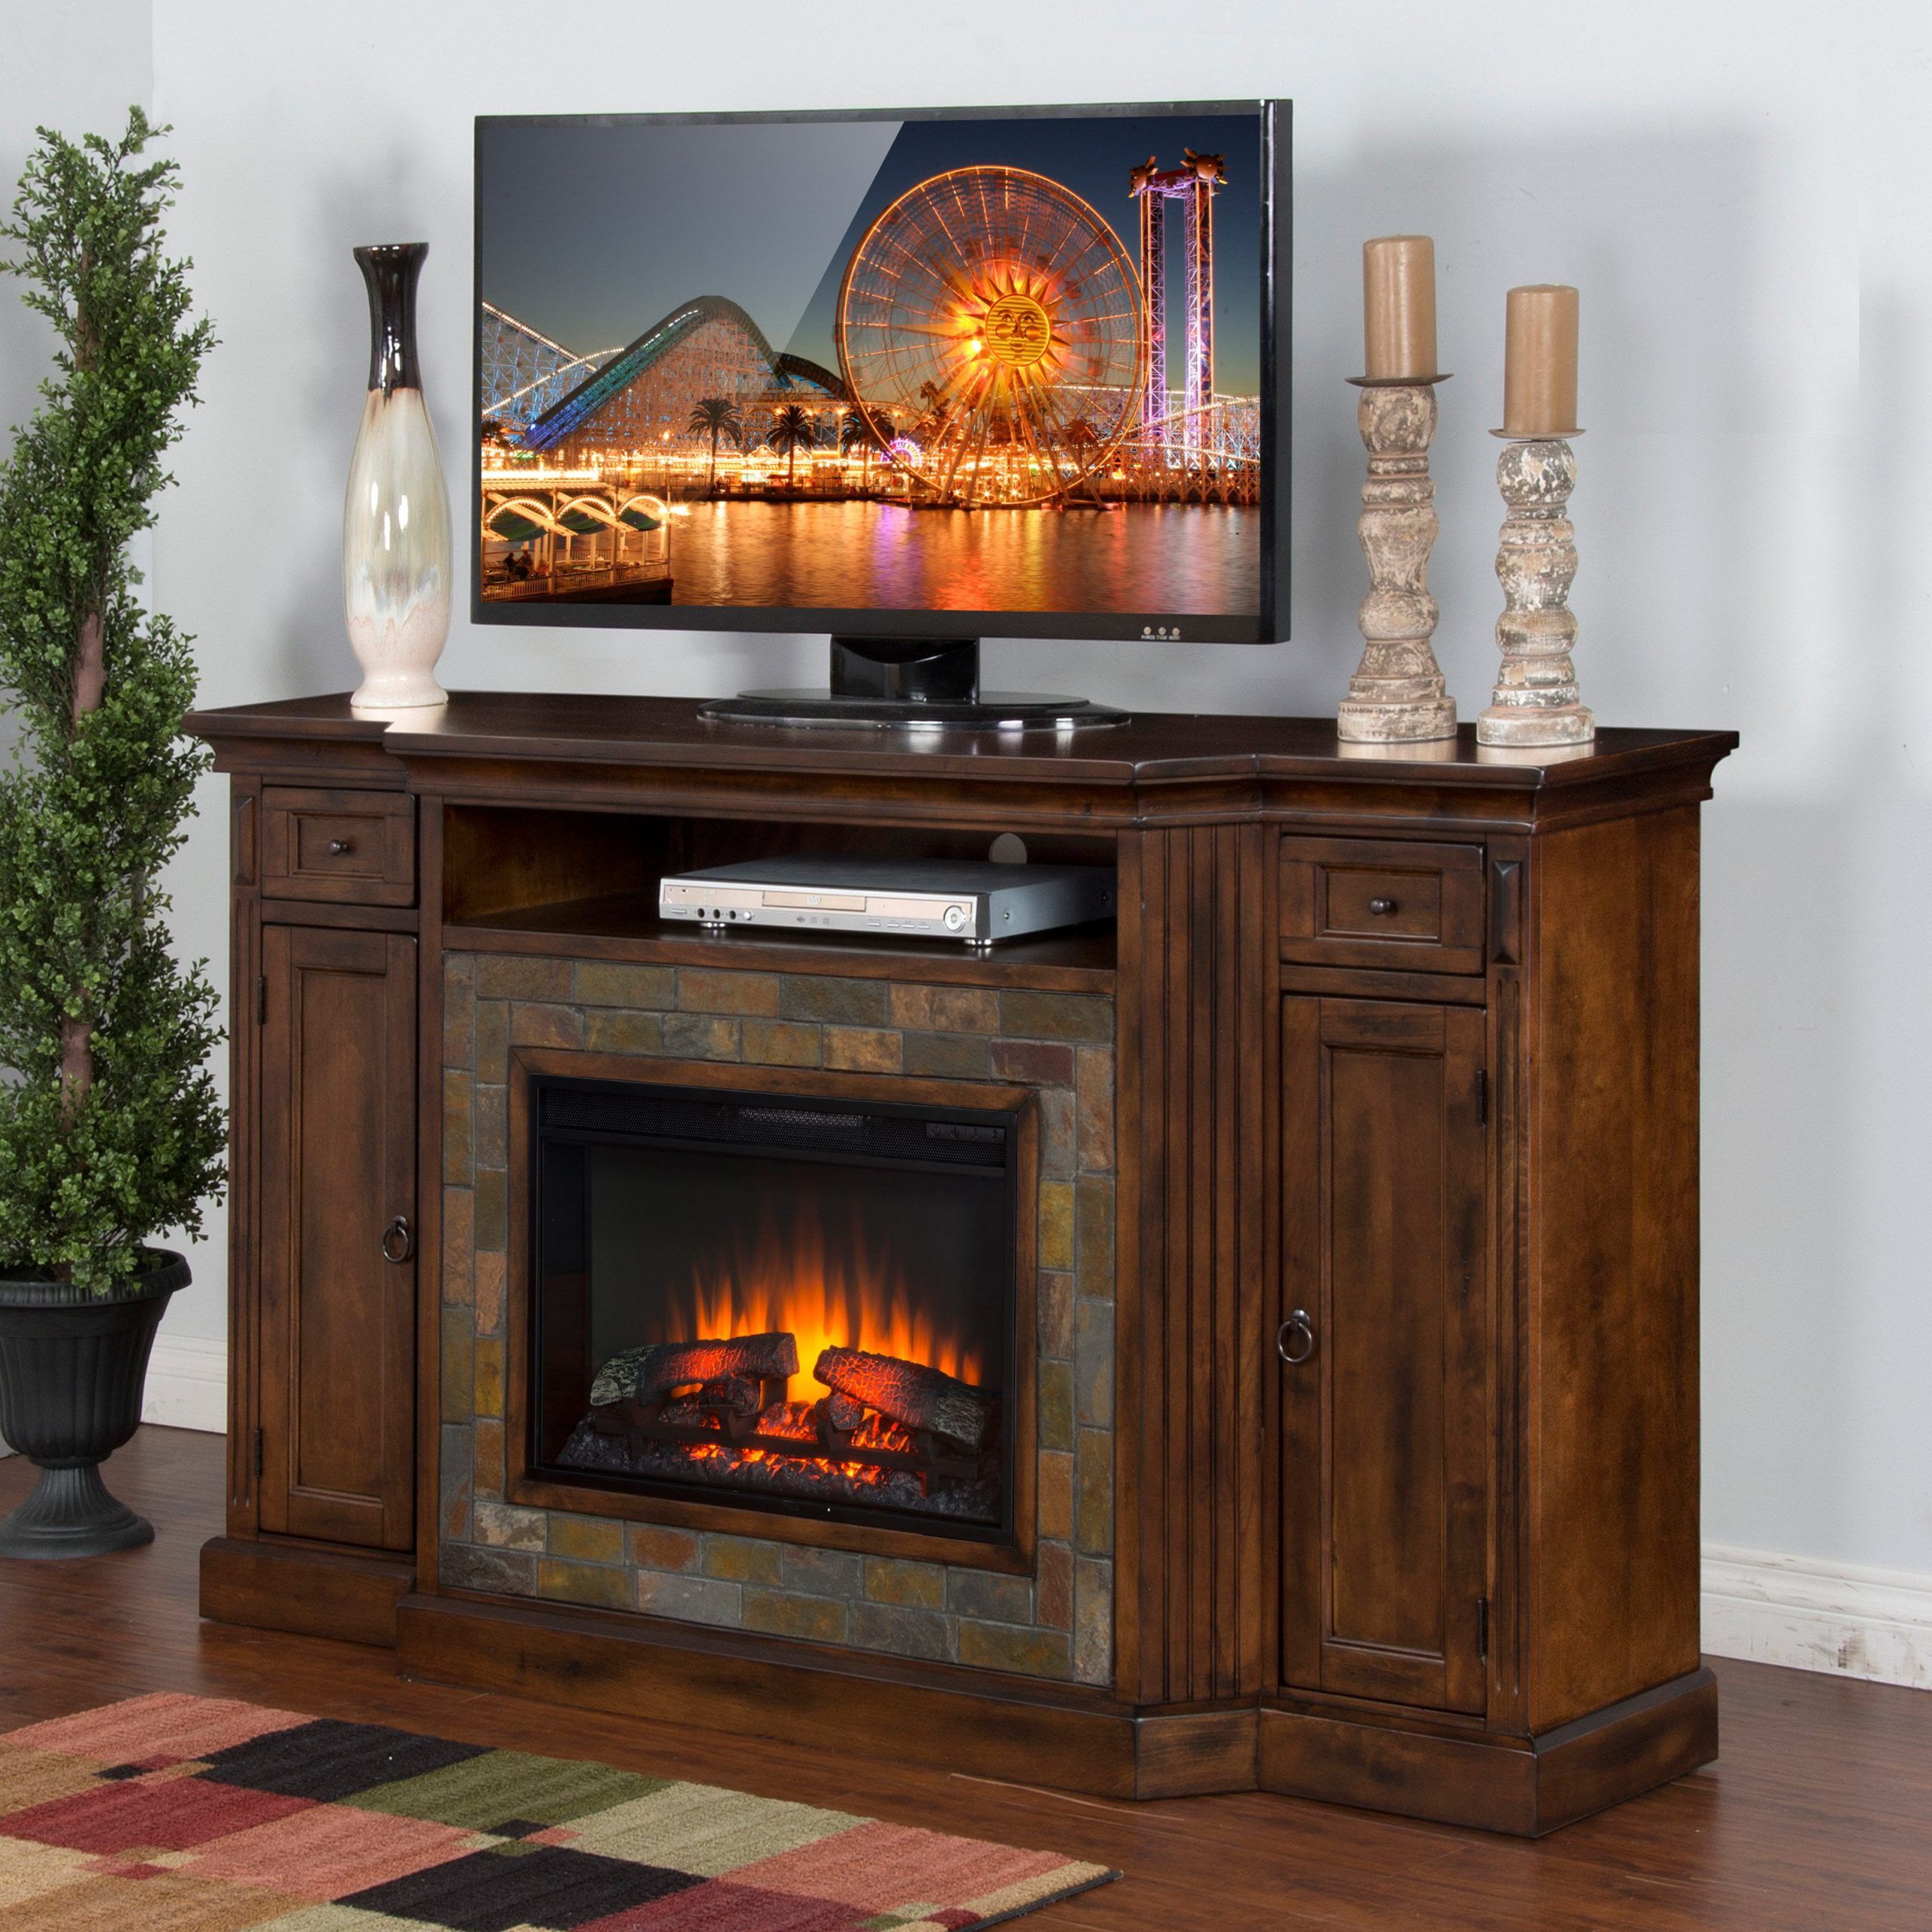 Sunny Designs Santa Fe 72 In. Electric Fireplace Tv Console – Walmart Inside Electric Fireplace Tv Stands (Gallery 2 of 20)